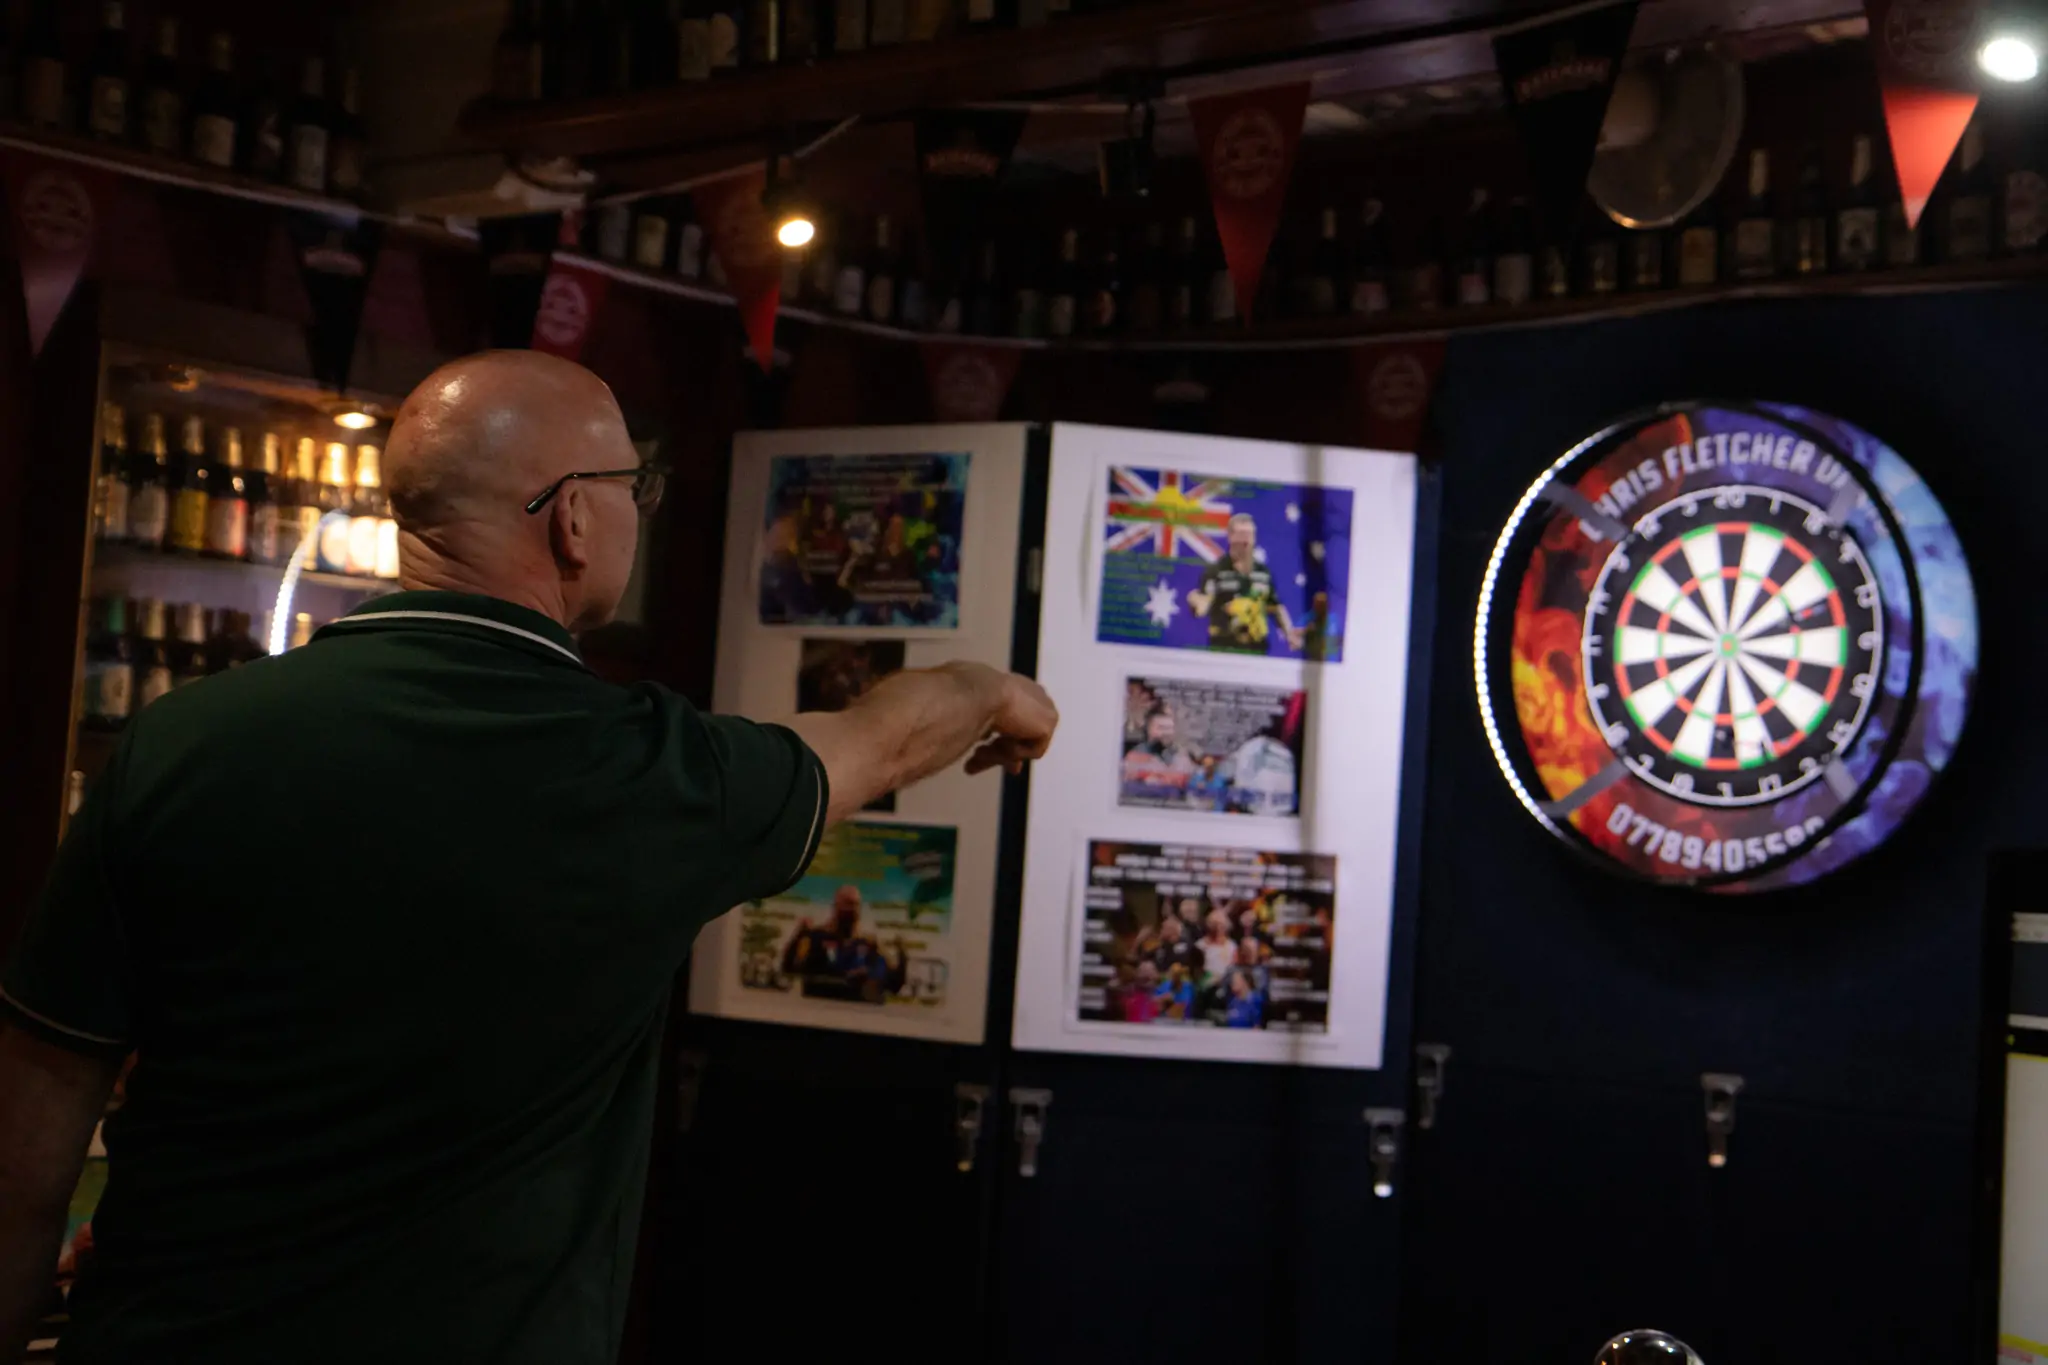 Peter Manley Pro Darts Player at the Batemans 150th anniversary celebrations darts with one of the competitors.